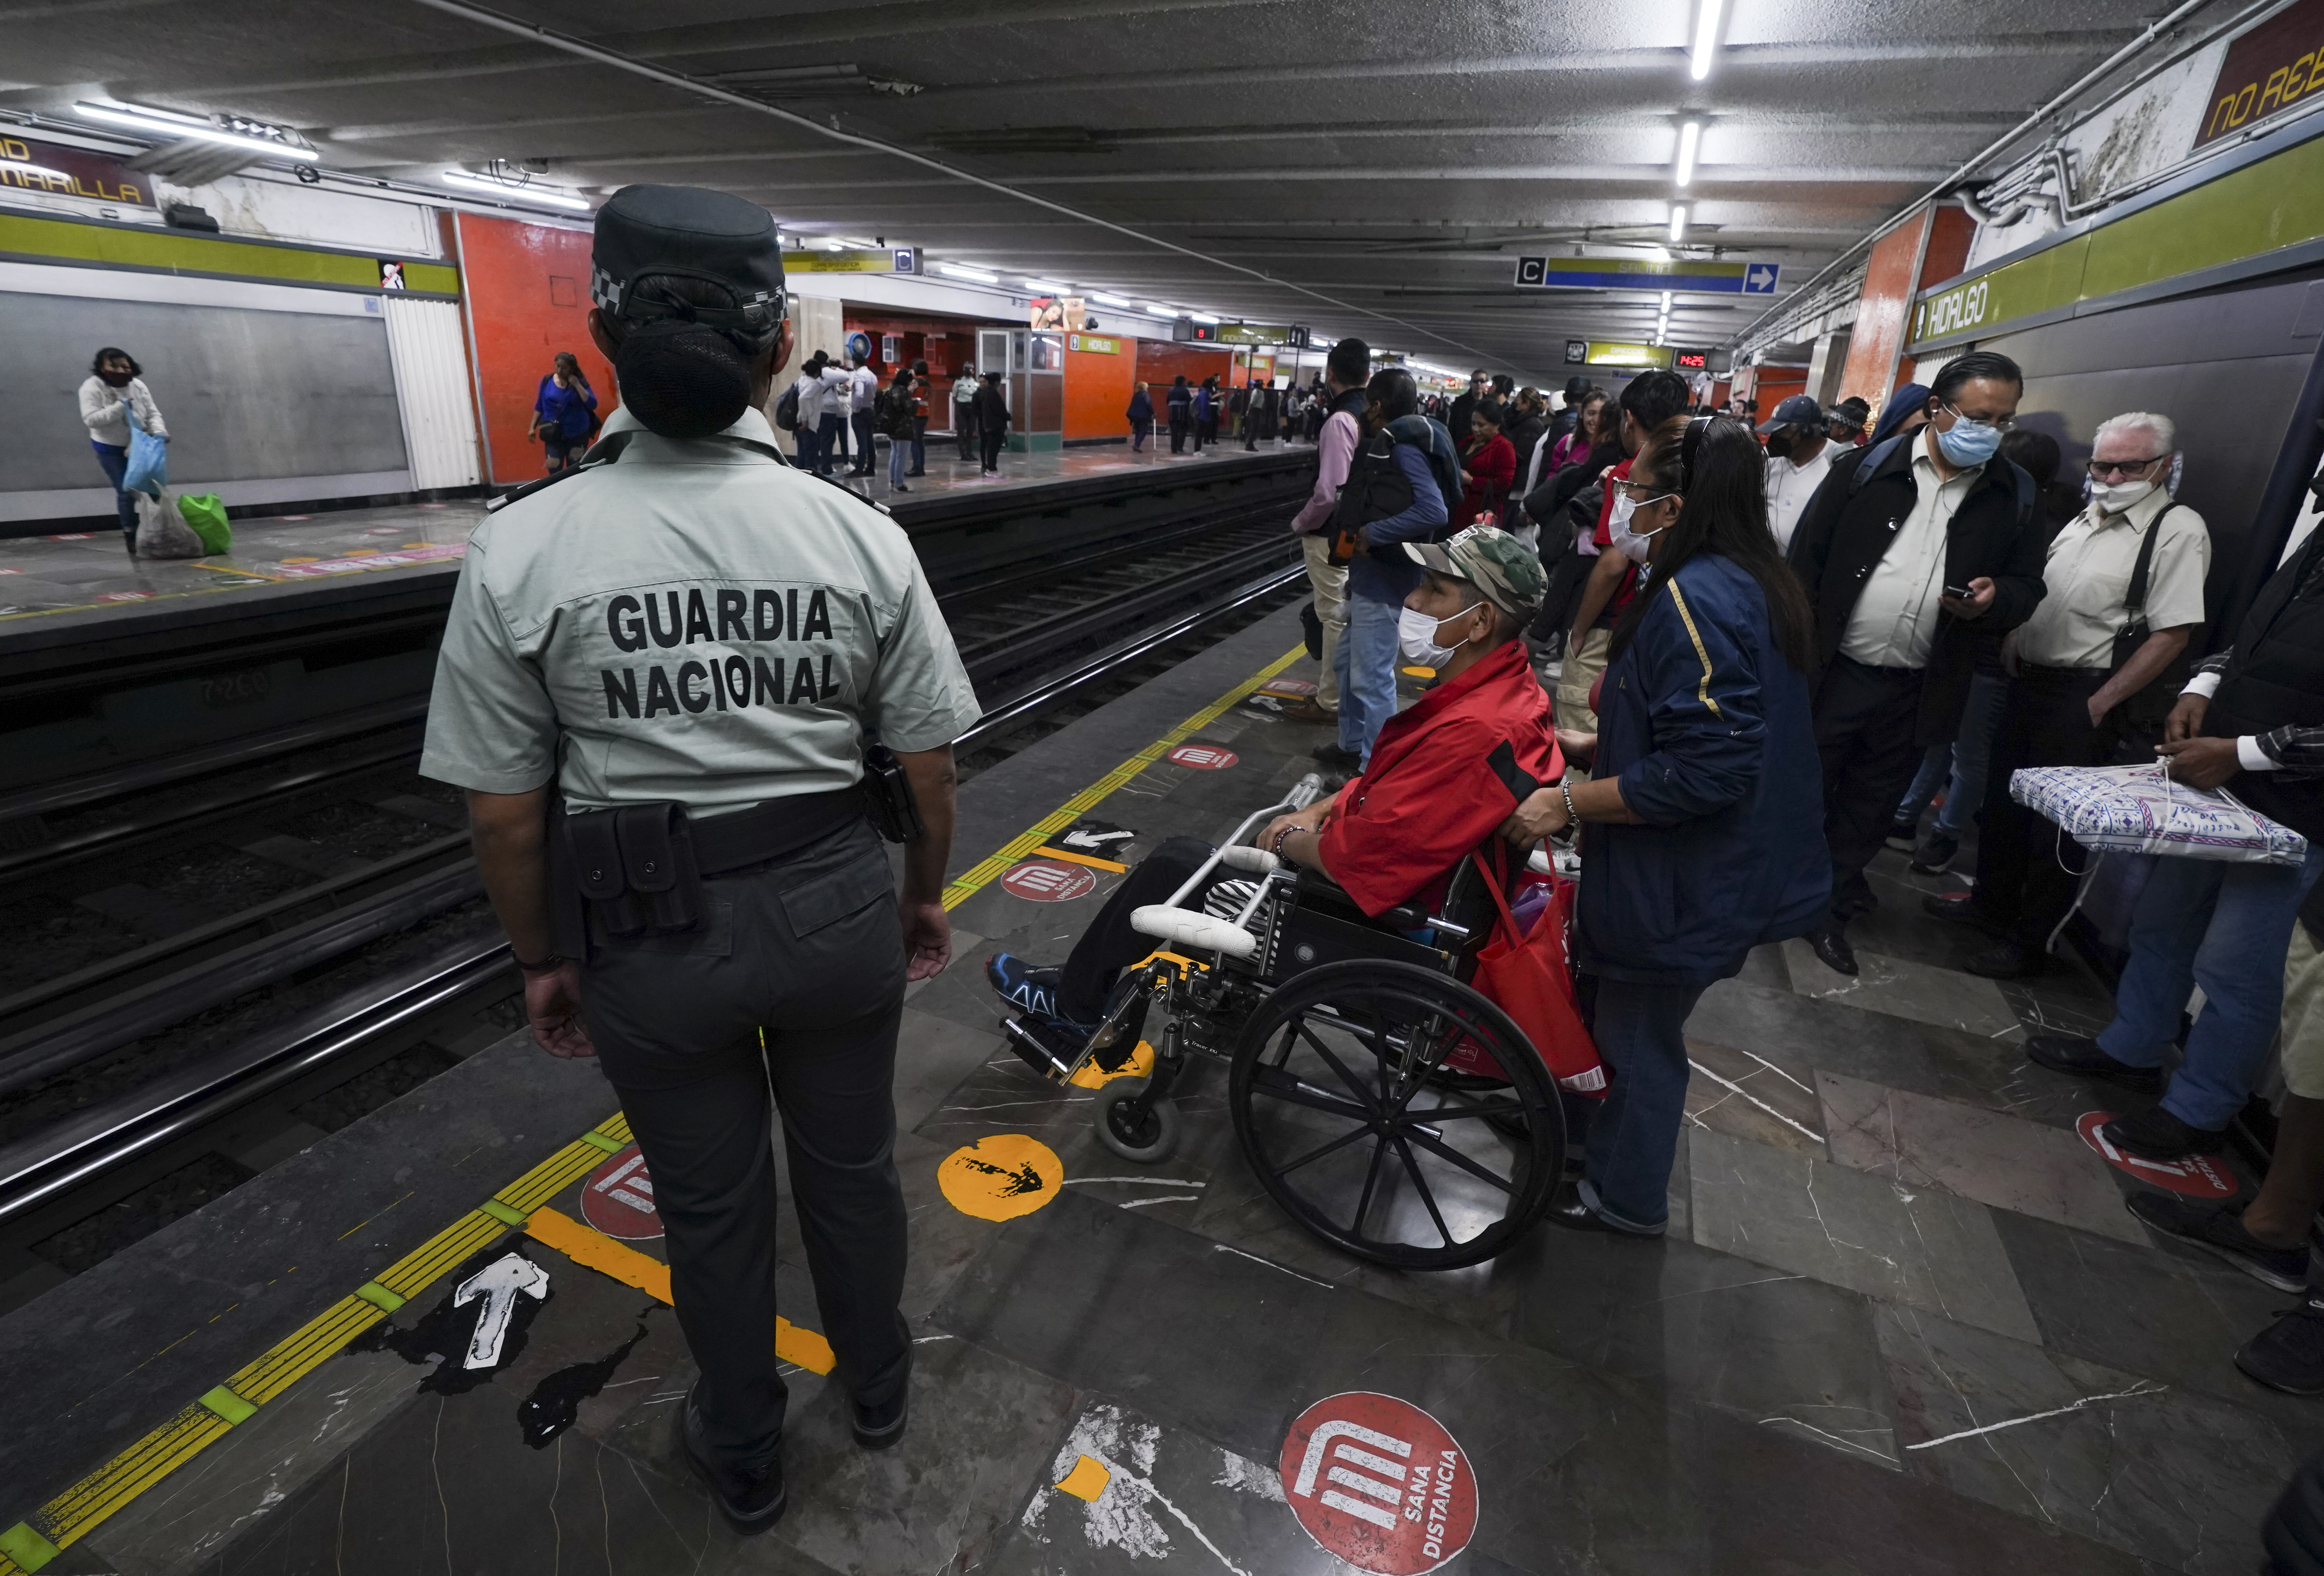 A National Guard agent watches a subway platform in Mexico City, on Thursday, January 12, 2023, after the authorities ordered to reinforce surveillance in that transport system before what they consider a series of "atypical and deliberate incidents".  (AP Photo/Fernando Llano)